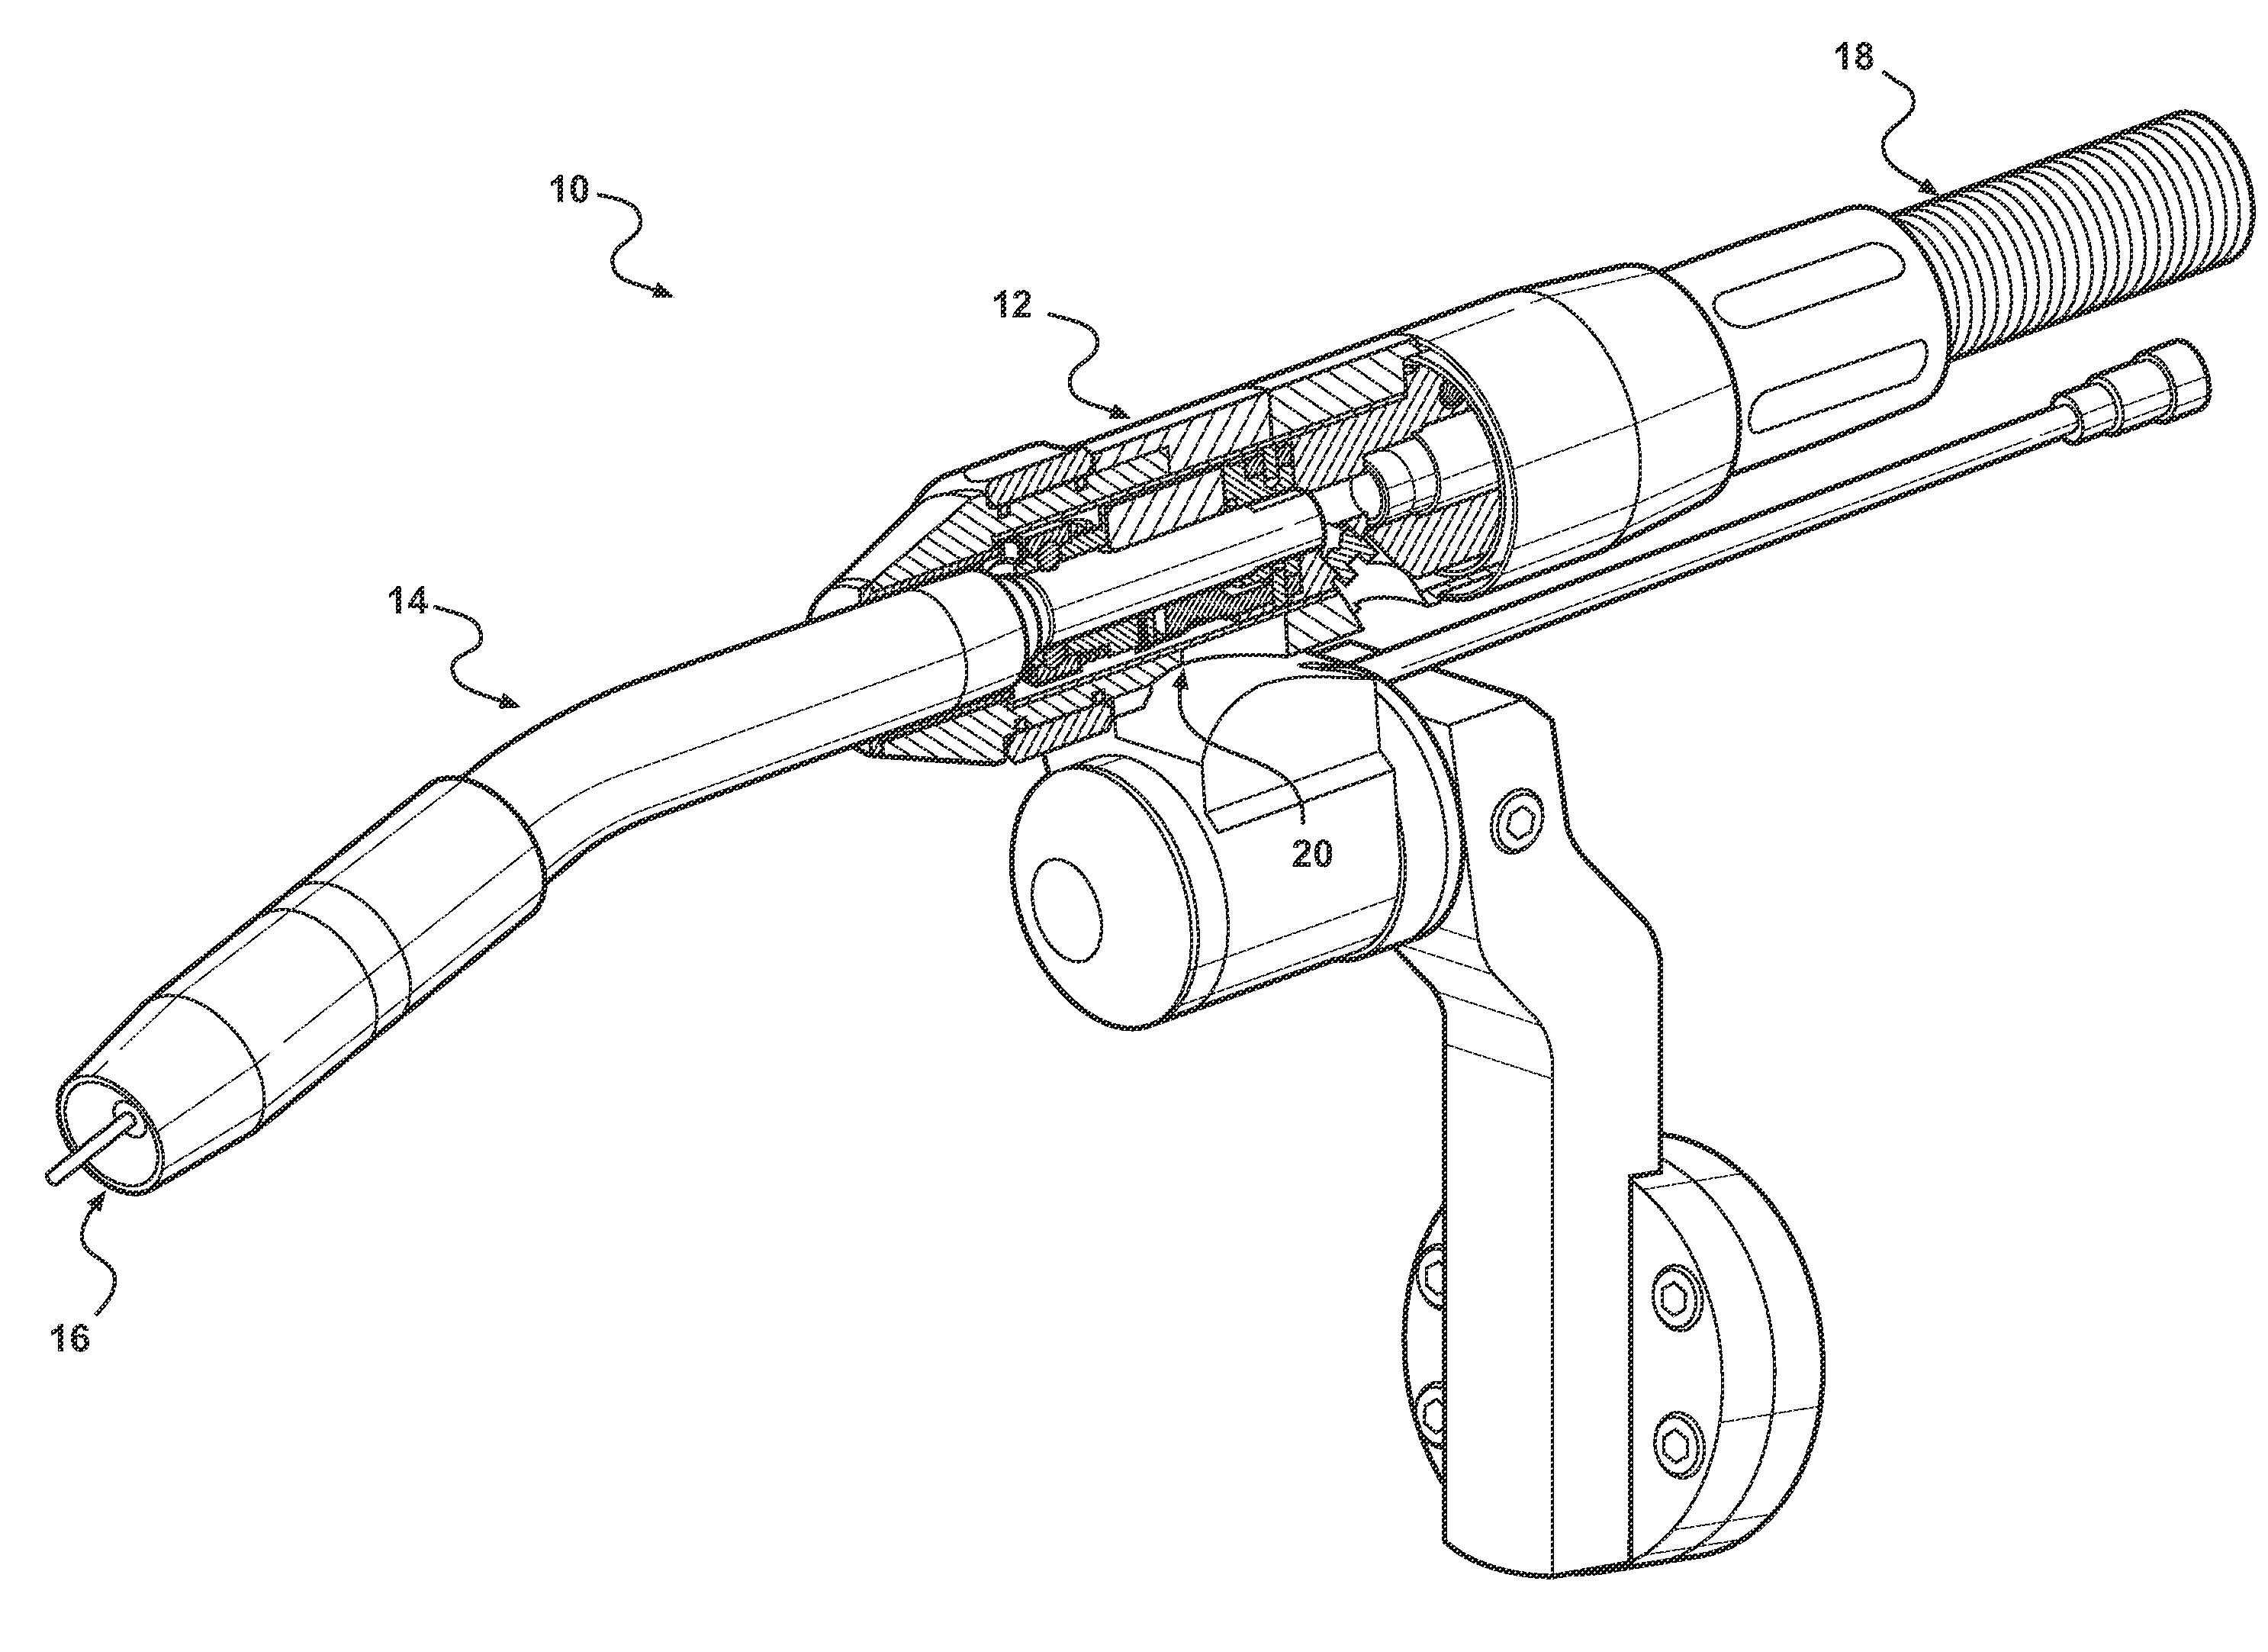 Robotic gmaw torch with quick release gooseneck locking mechanism, dual alignment features, and multiple electrical contacts